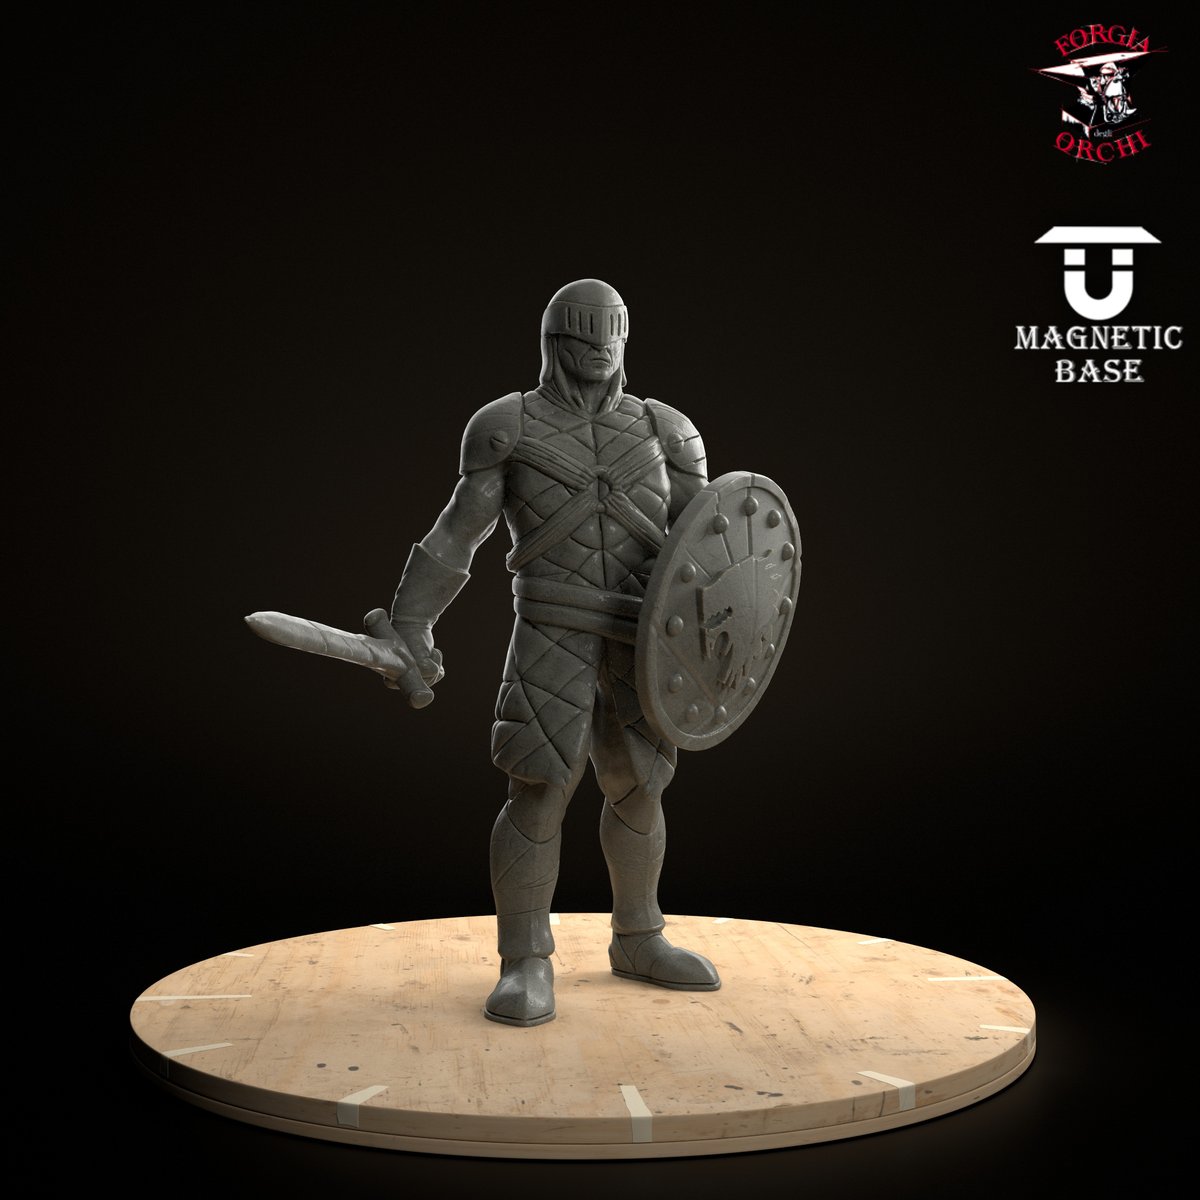 Guard
3D model by Brayan Nafarrate (gumroad.com/nafarrate)
Buy it on our site forgiadegliorchi.it #3dPrinting #3dModeling #miniature #rpg #tabletopminiatures #tabletopgames #roleplayinggame #roleplaygame #dungeonsanddragons #dndminiatures #resinprintint